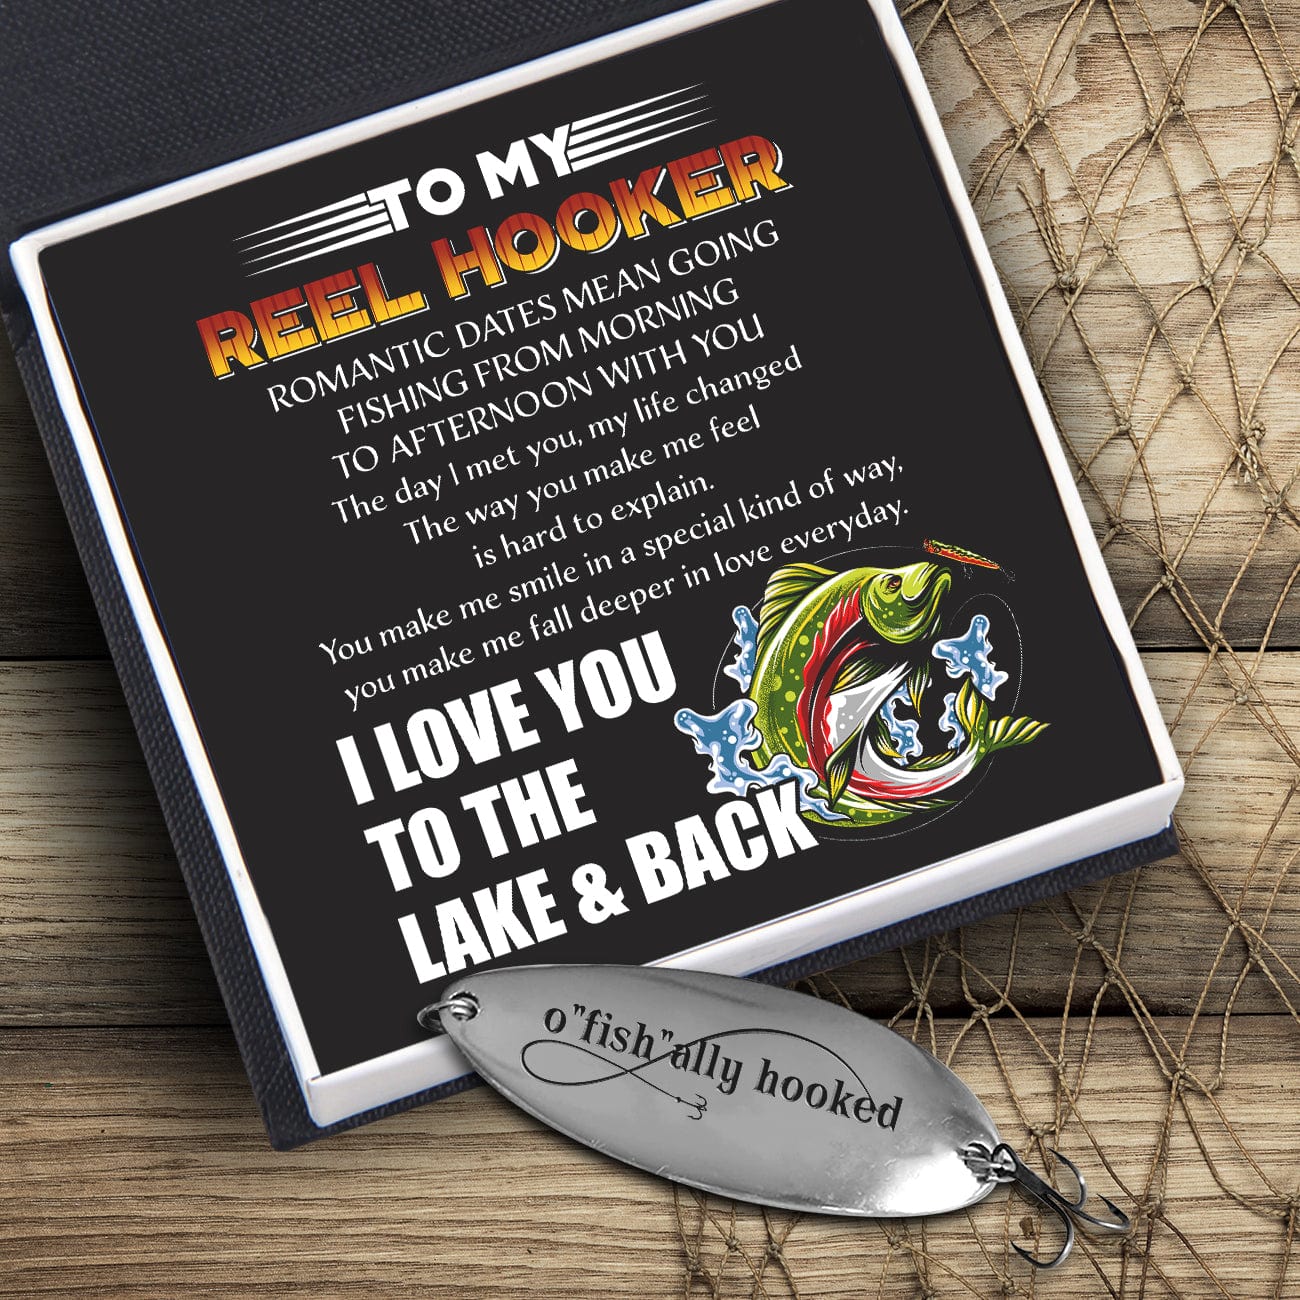 Fishing Lure - Fishing - To My Reel Hooker - You Make Me Smile In A Special Kind Of Way - Gfb26004